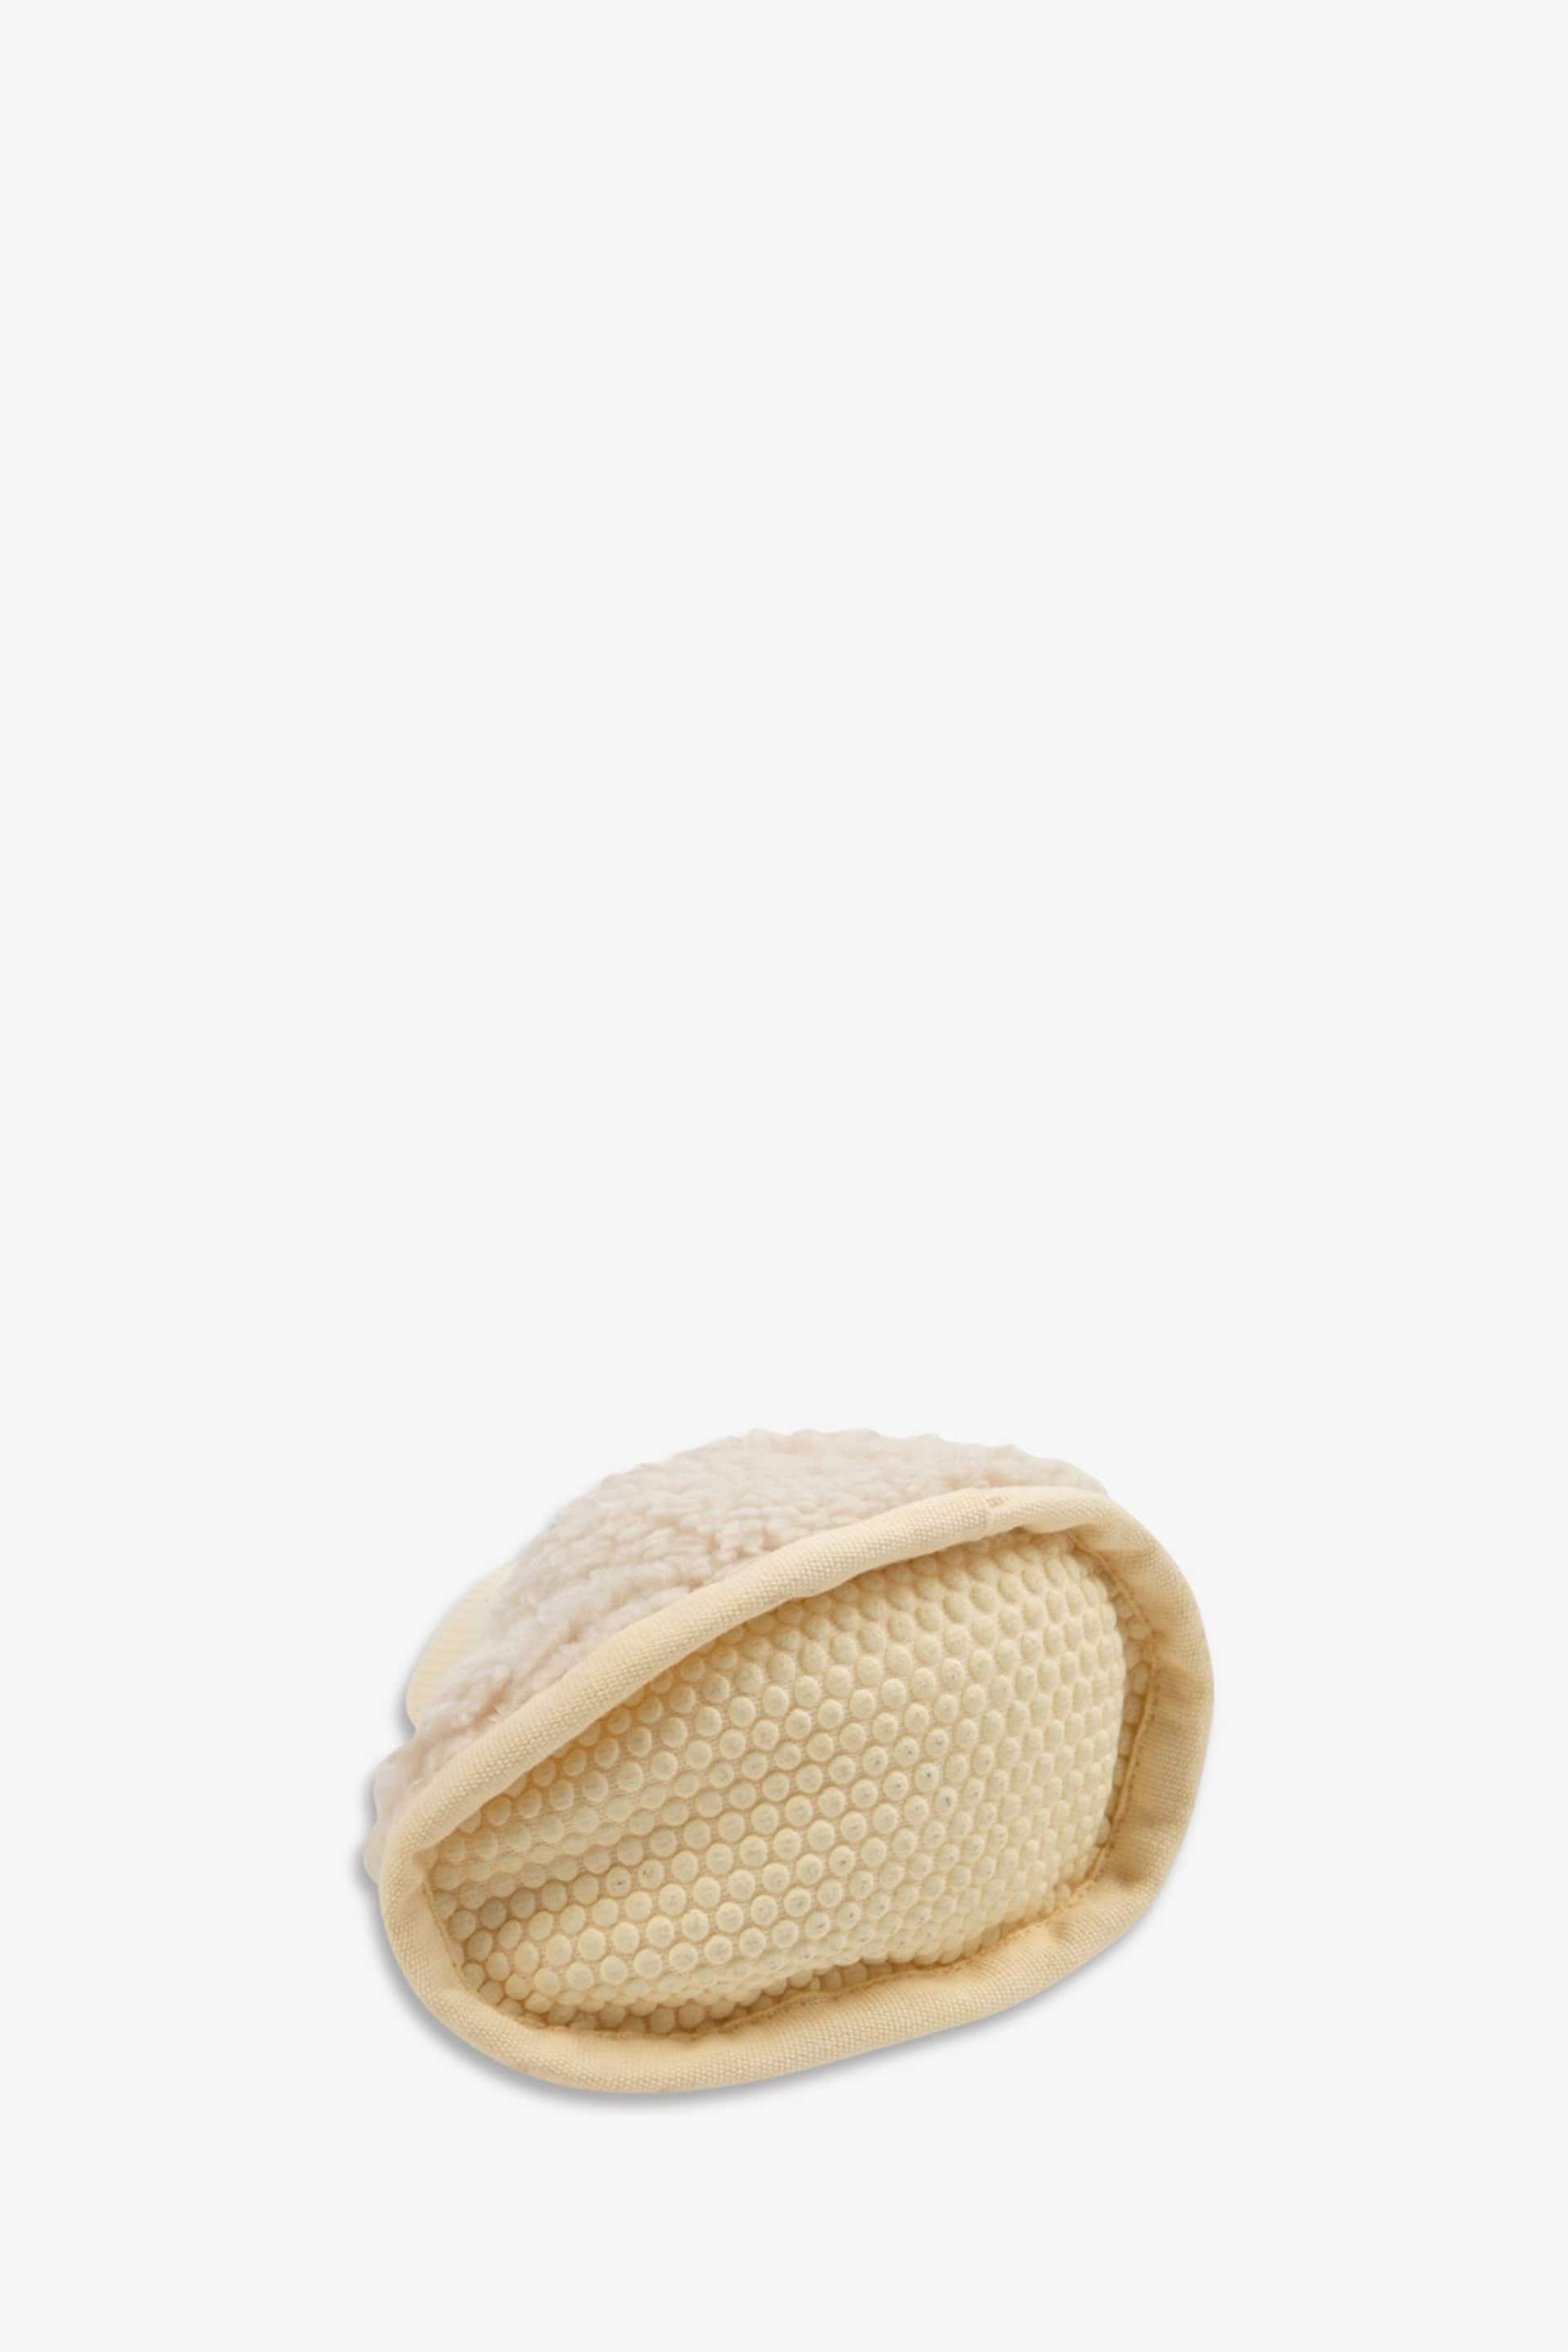 The Little Tailor Plush Lined Sherpa Fleece Borg Baby Booties - Image 4 of 4